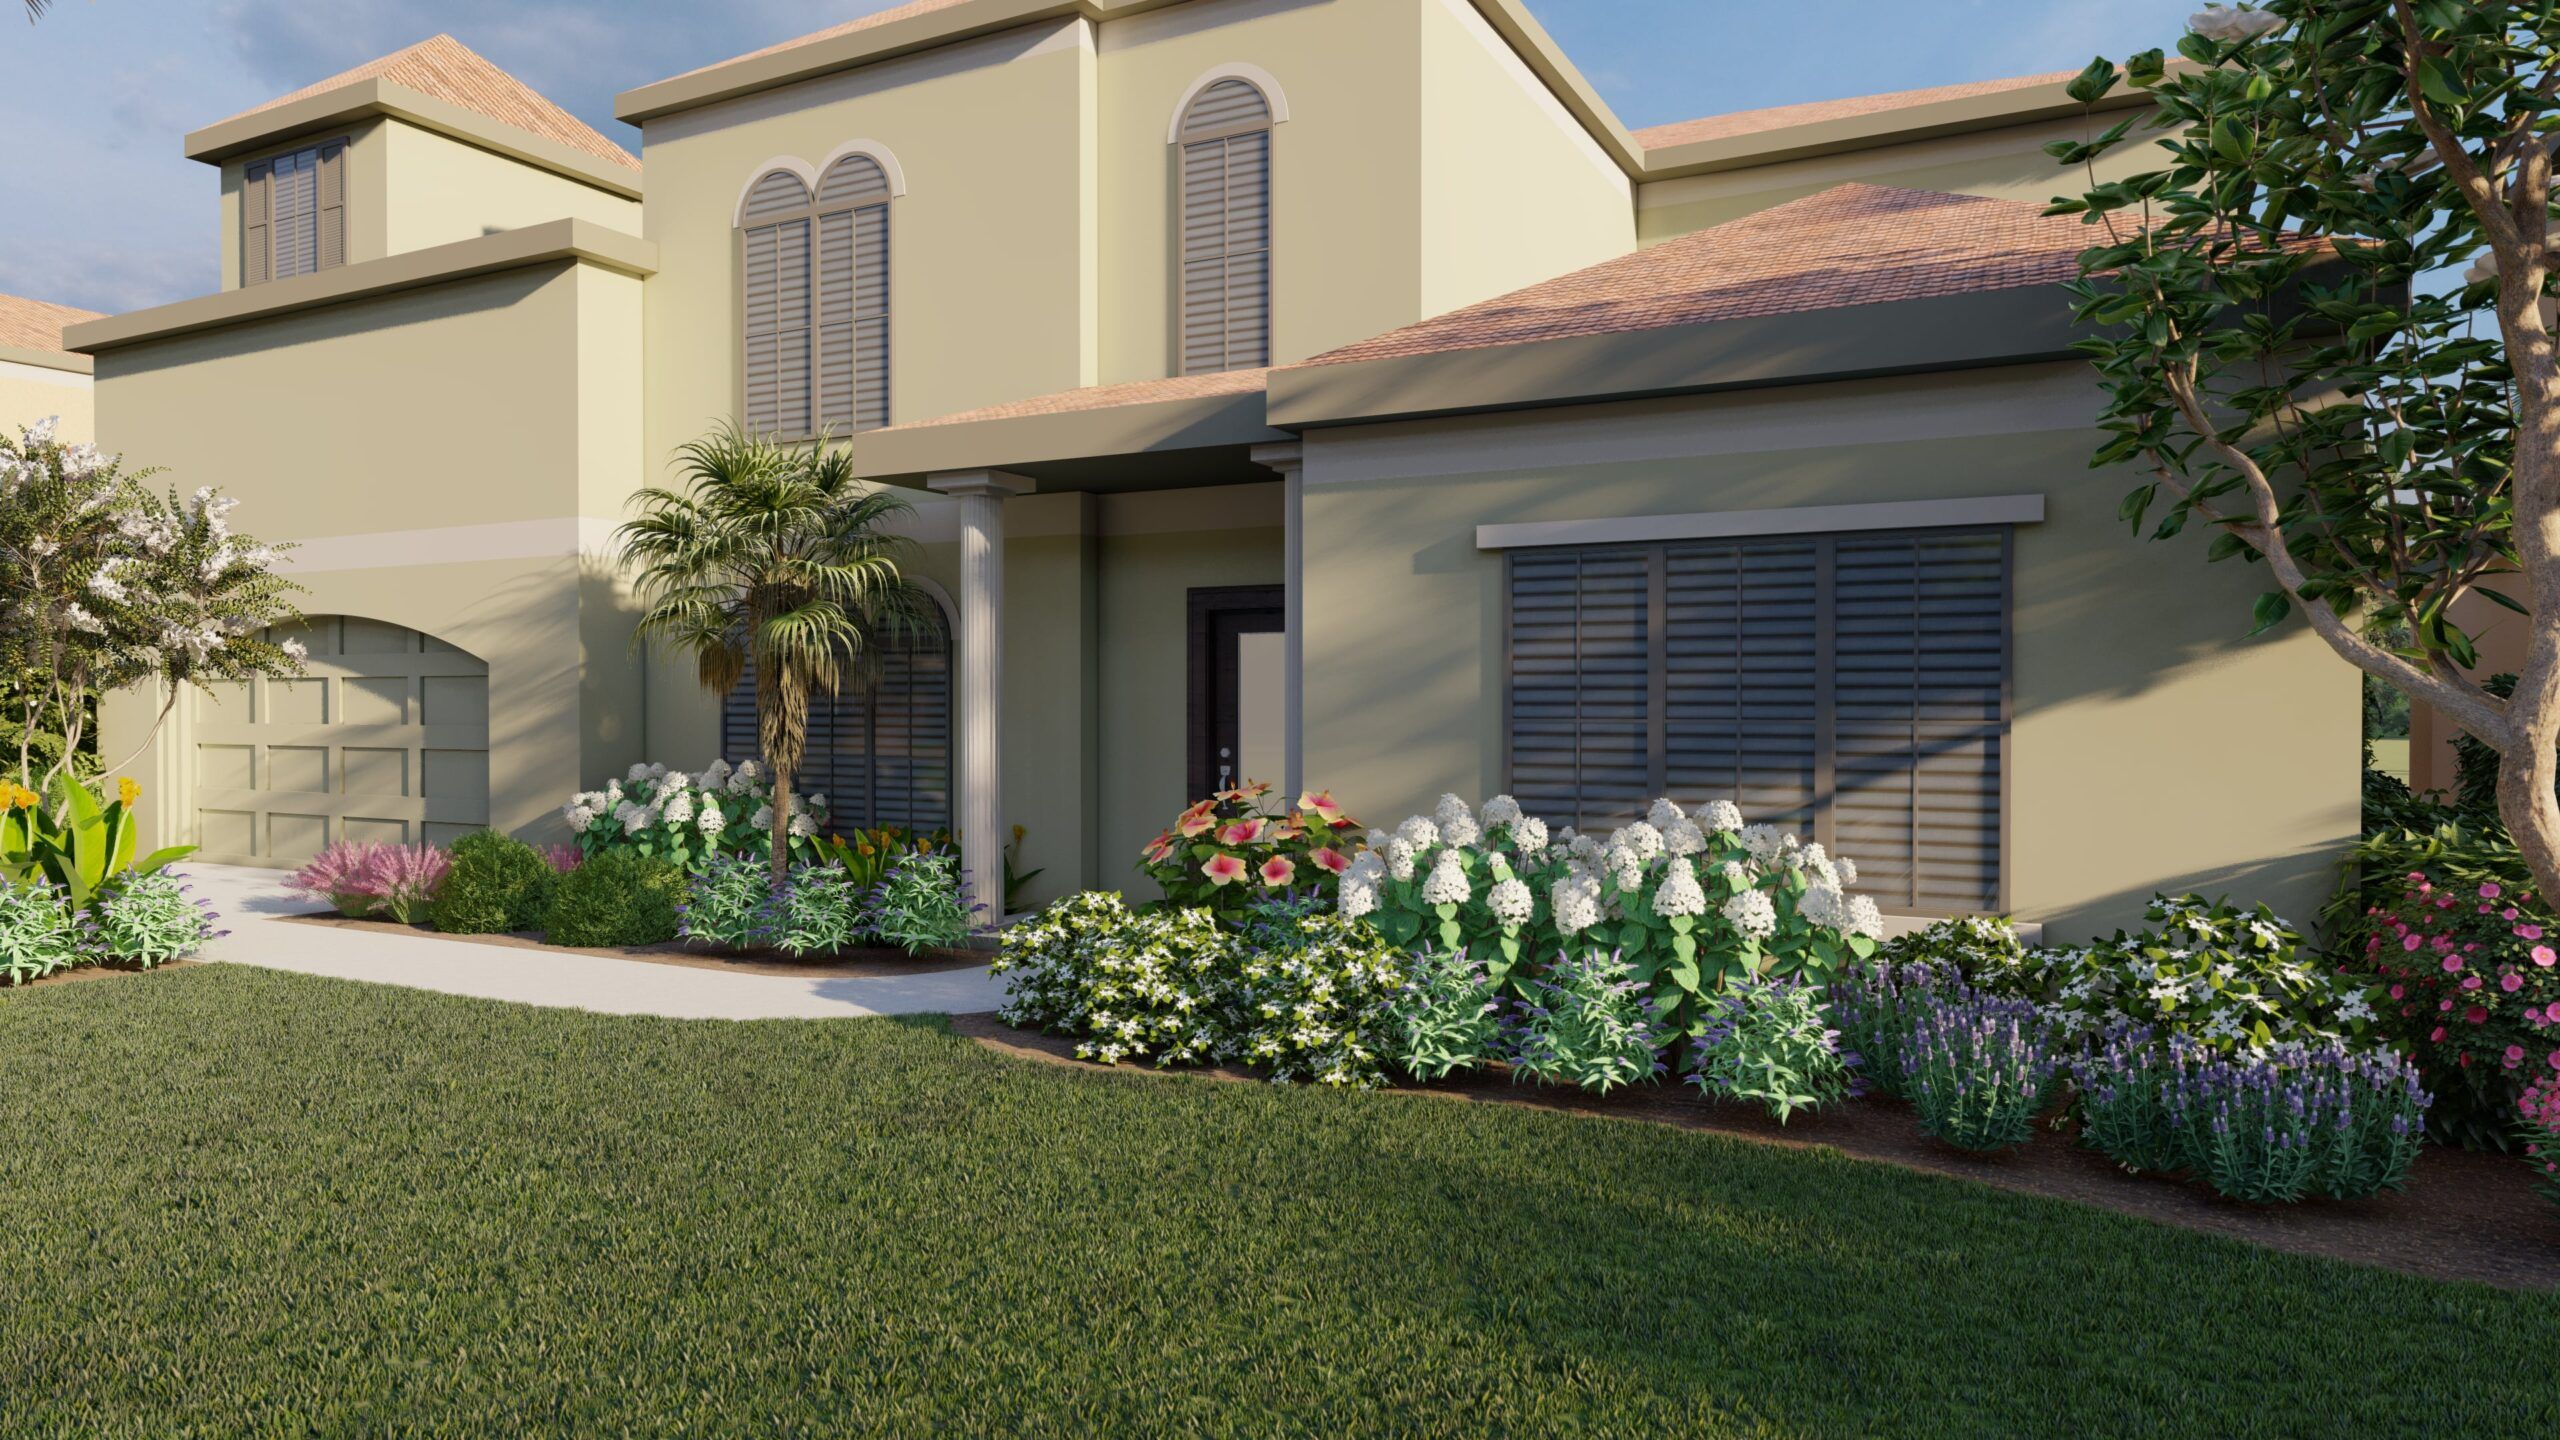 A florida front yard landscaping plan with plants and flowers in a small front yard 